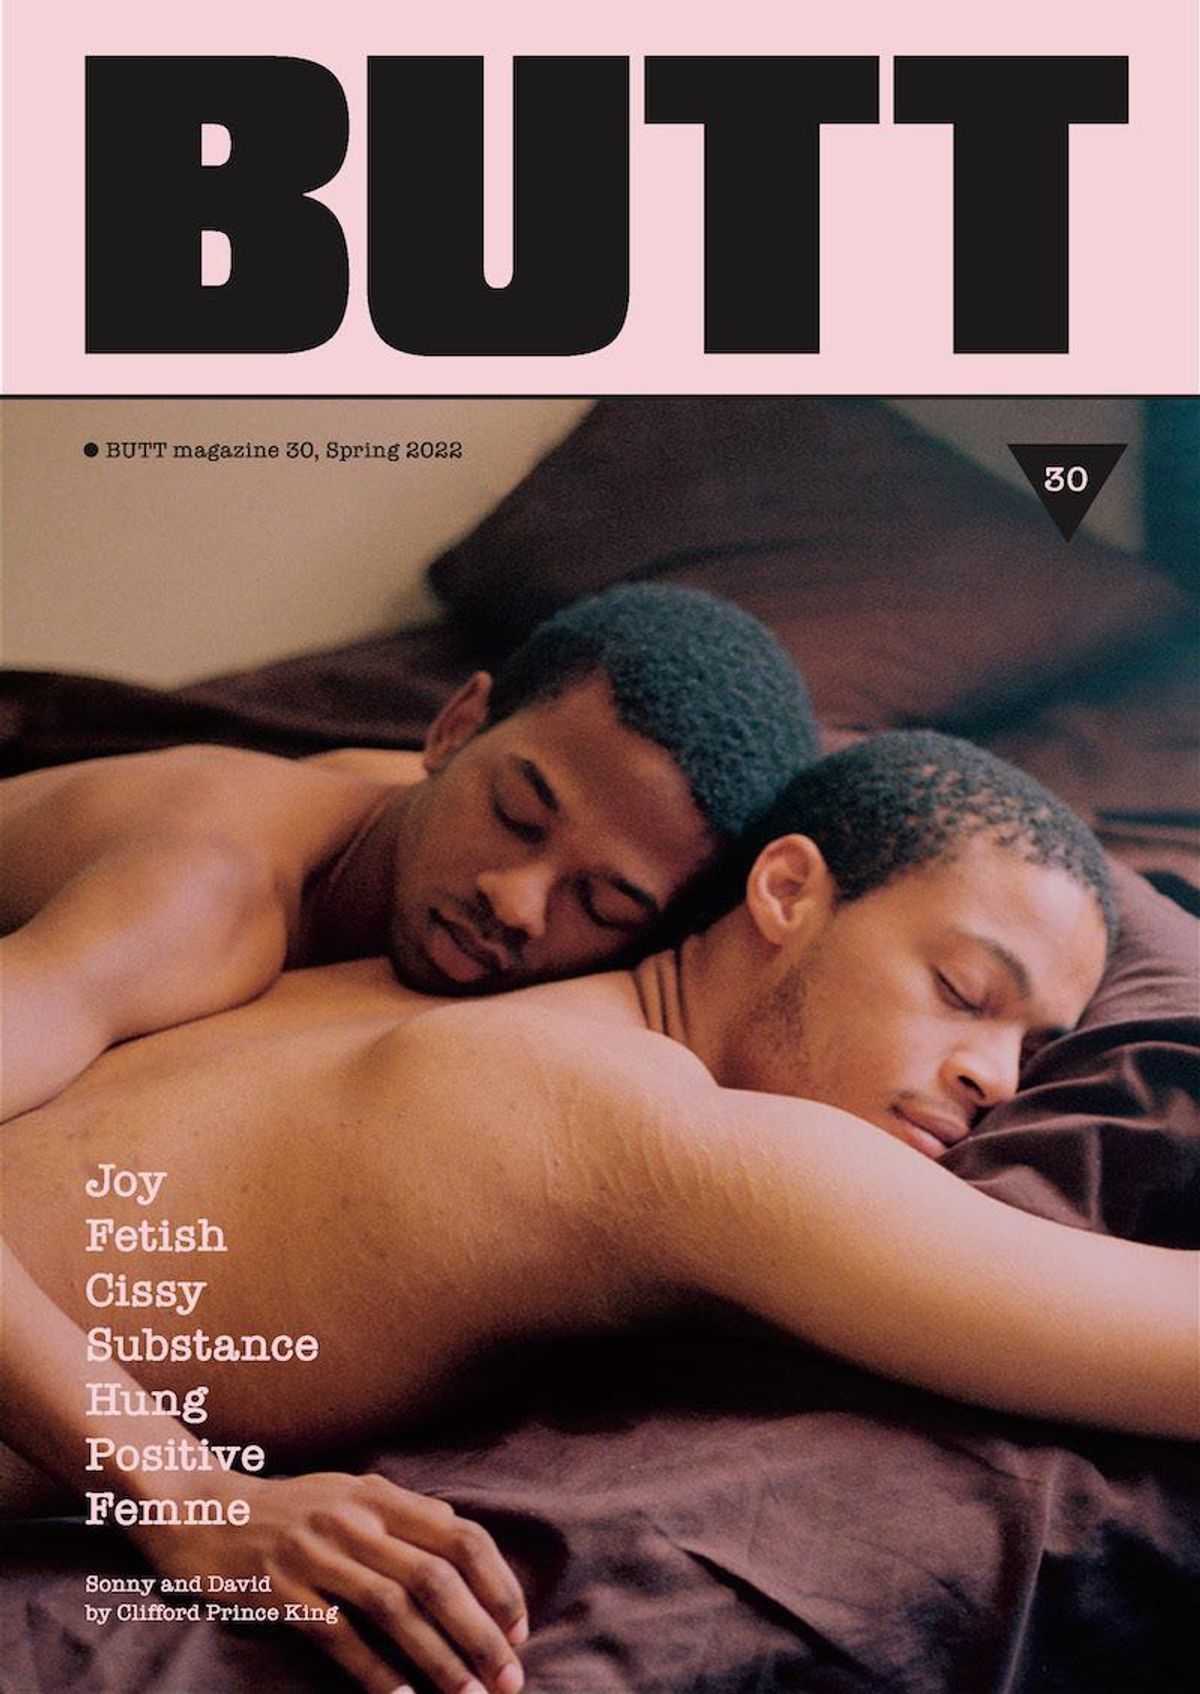 30th Cover of Butt Magazine